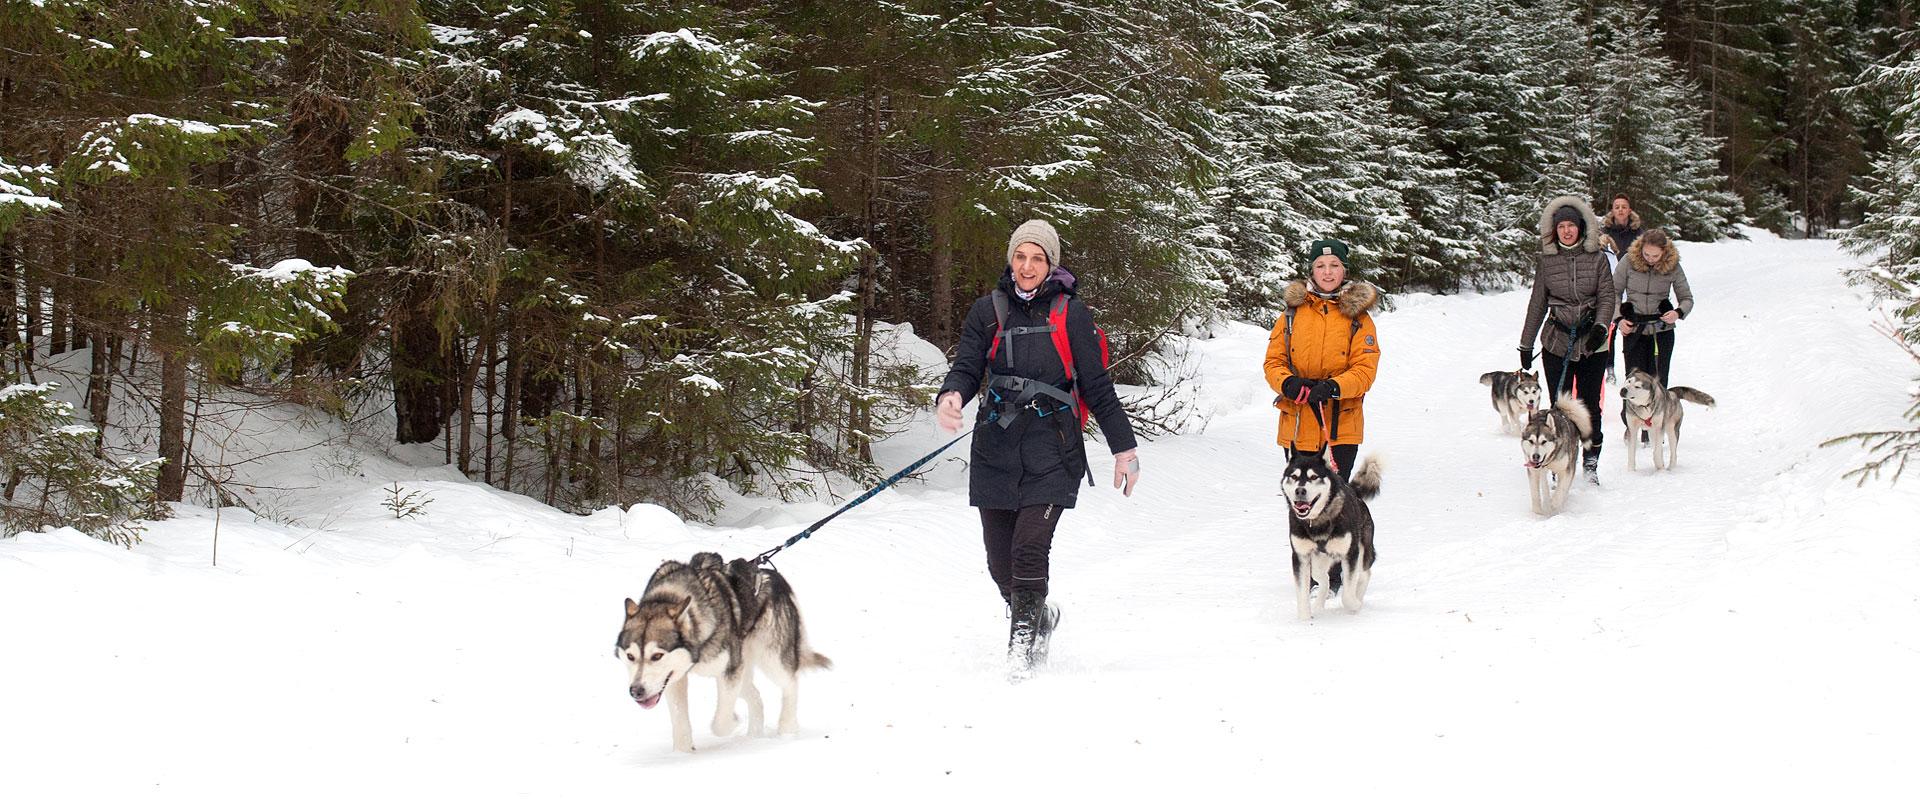 Hiking with sled dogs